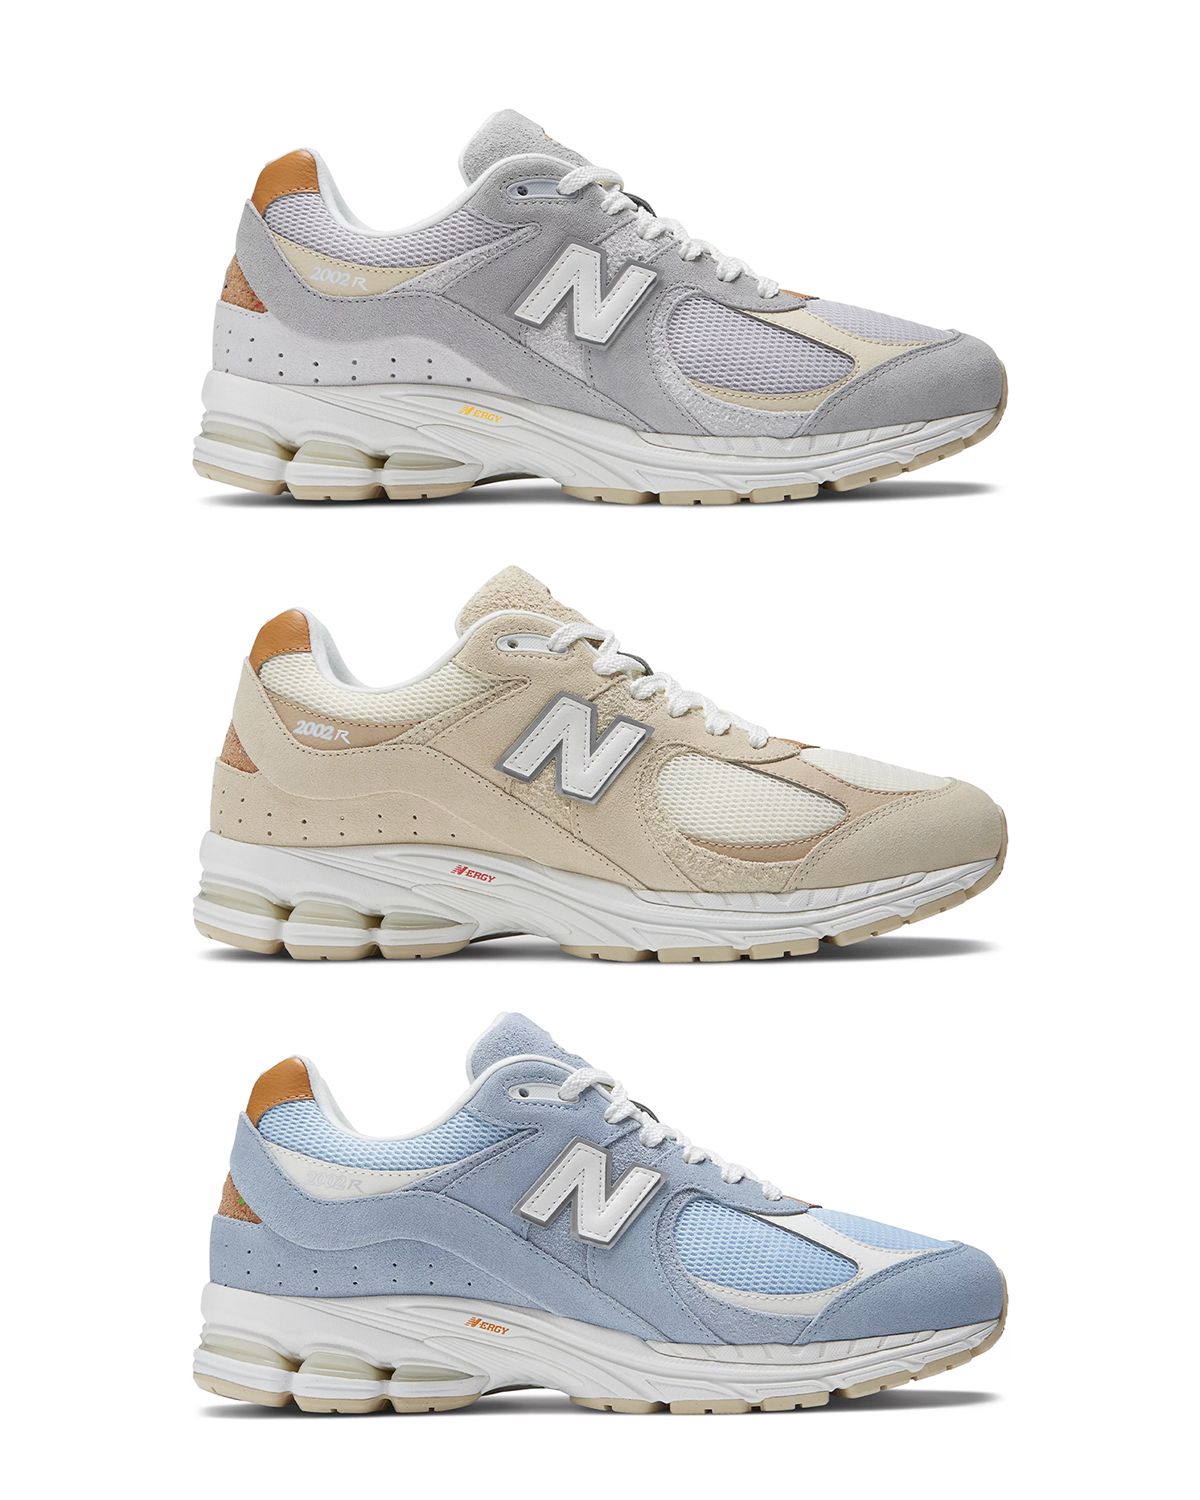 First Looks // New Balance 2002R “White Fur” | House of Heat°